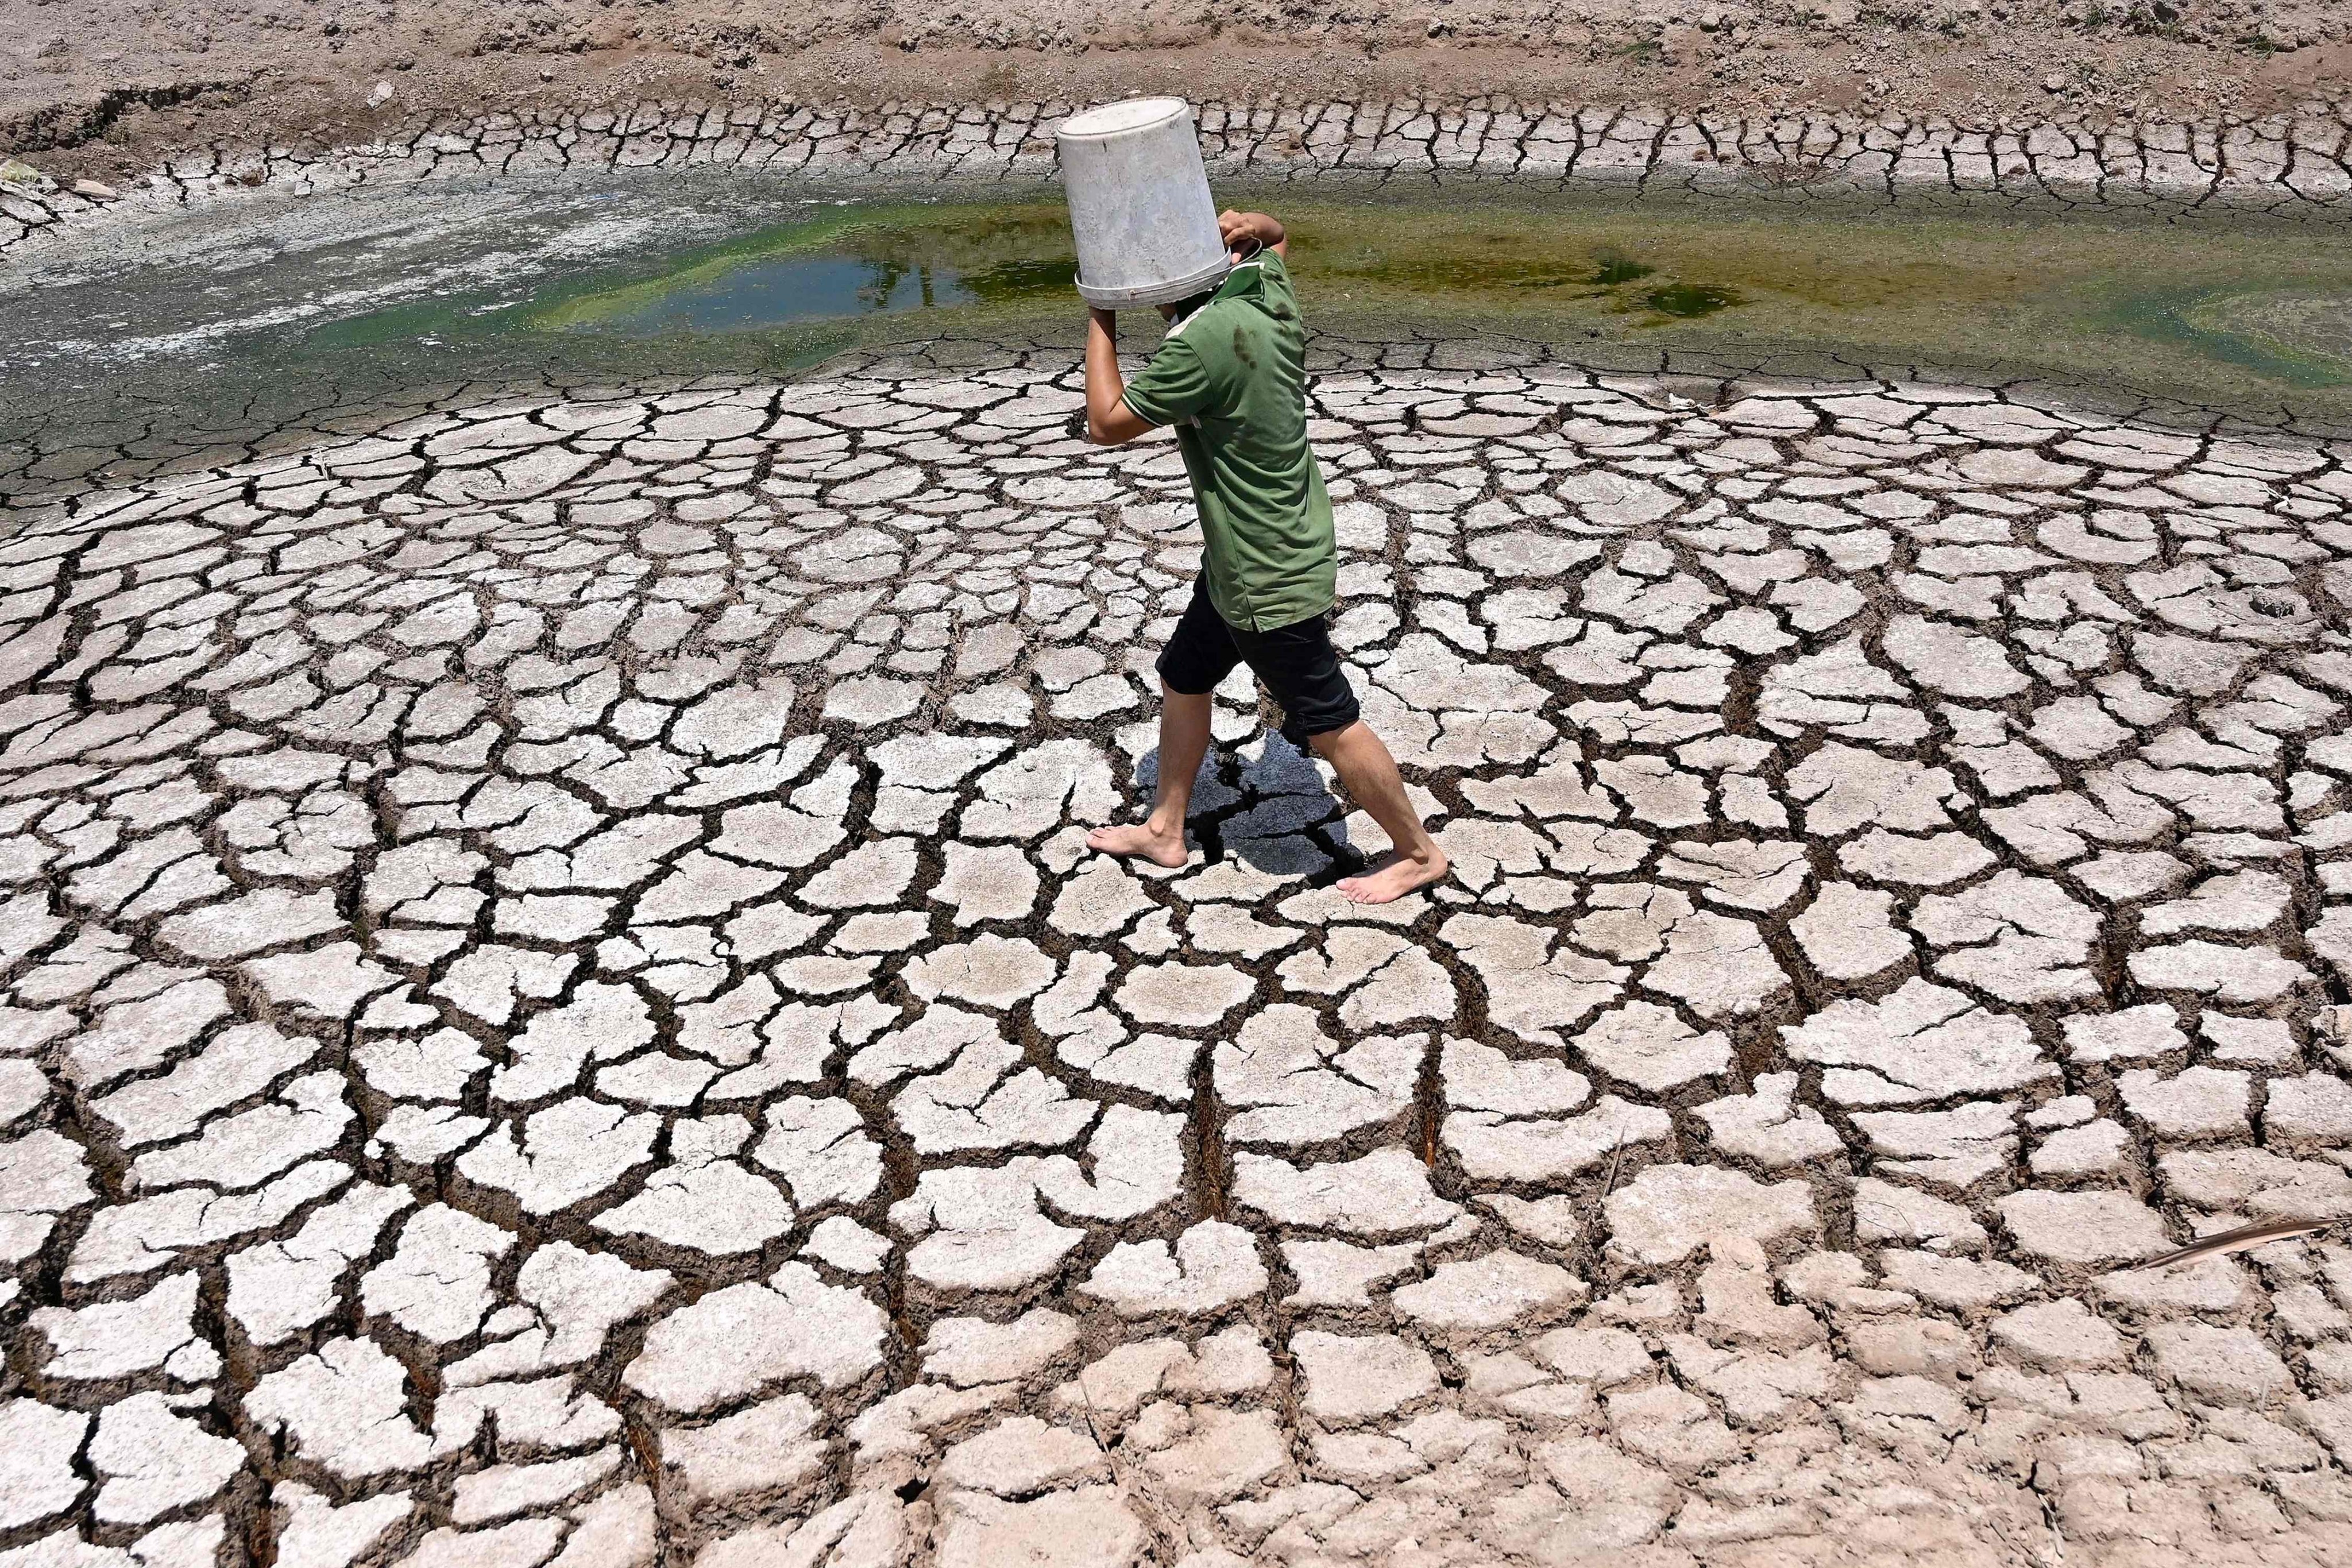 A man carries a plastic bucket across the cracked bed of a dried-up pond in Vietnam’s southern Ben Tre province. Photo: AFP